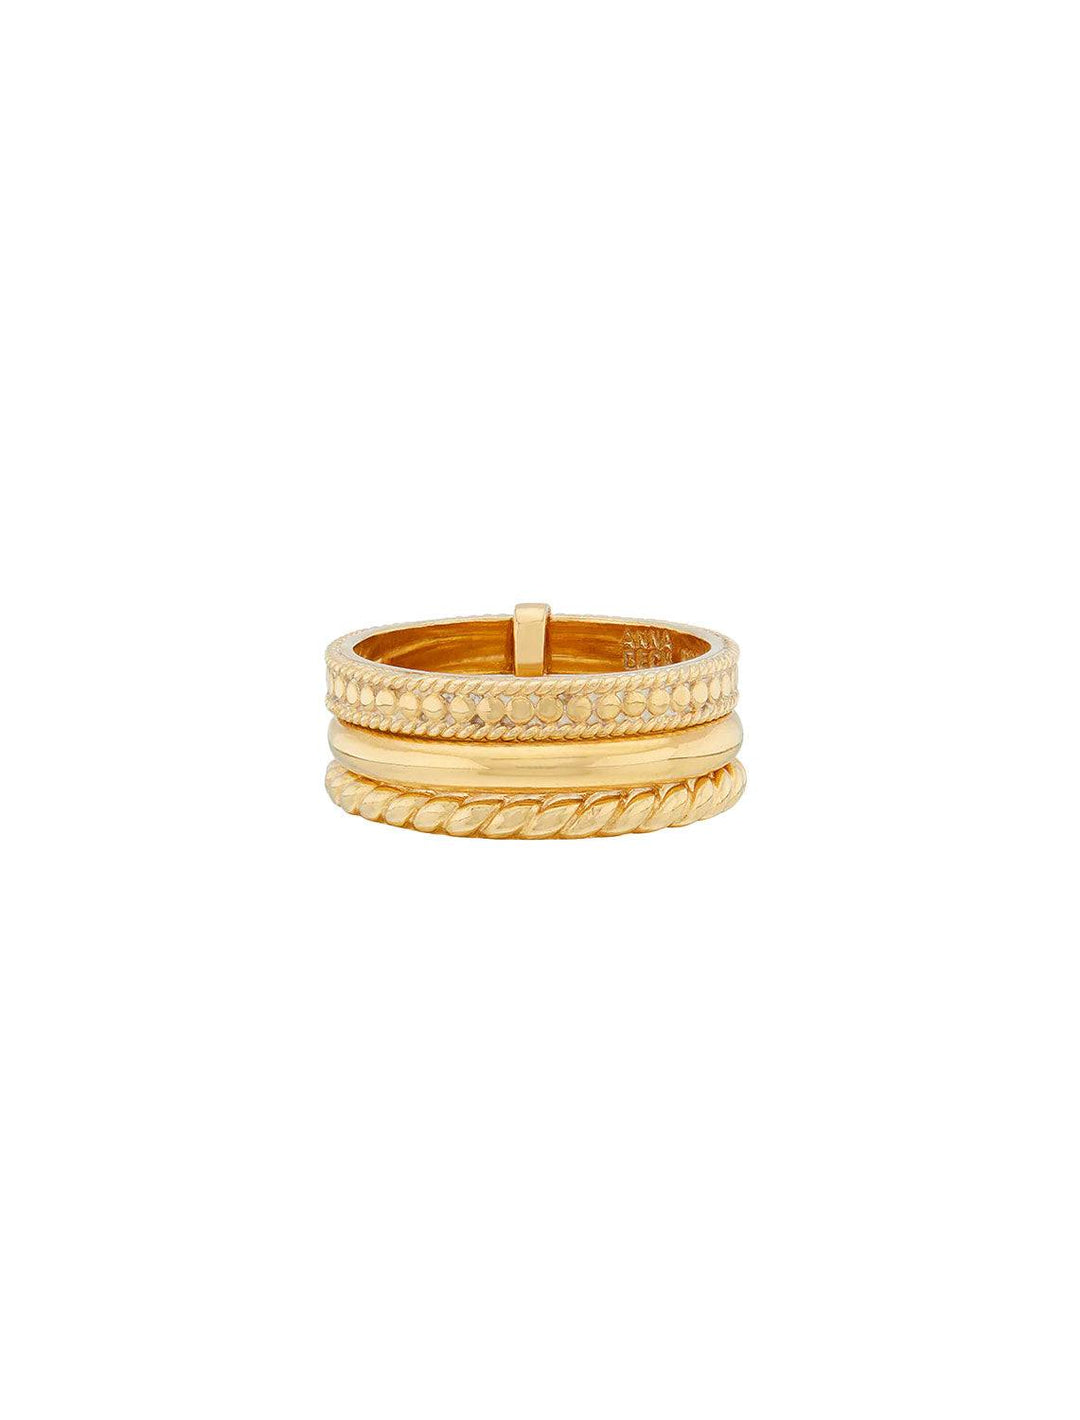 Front view of Anna Beck's classic triple stacking ring in gold.